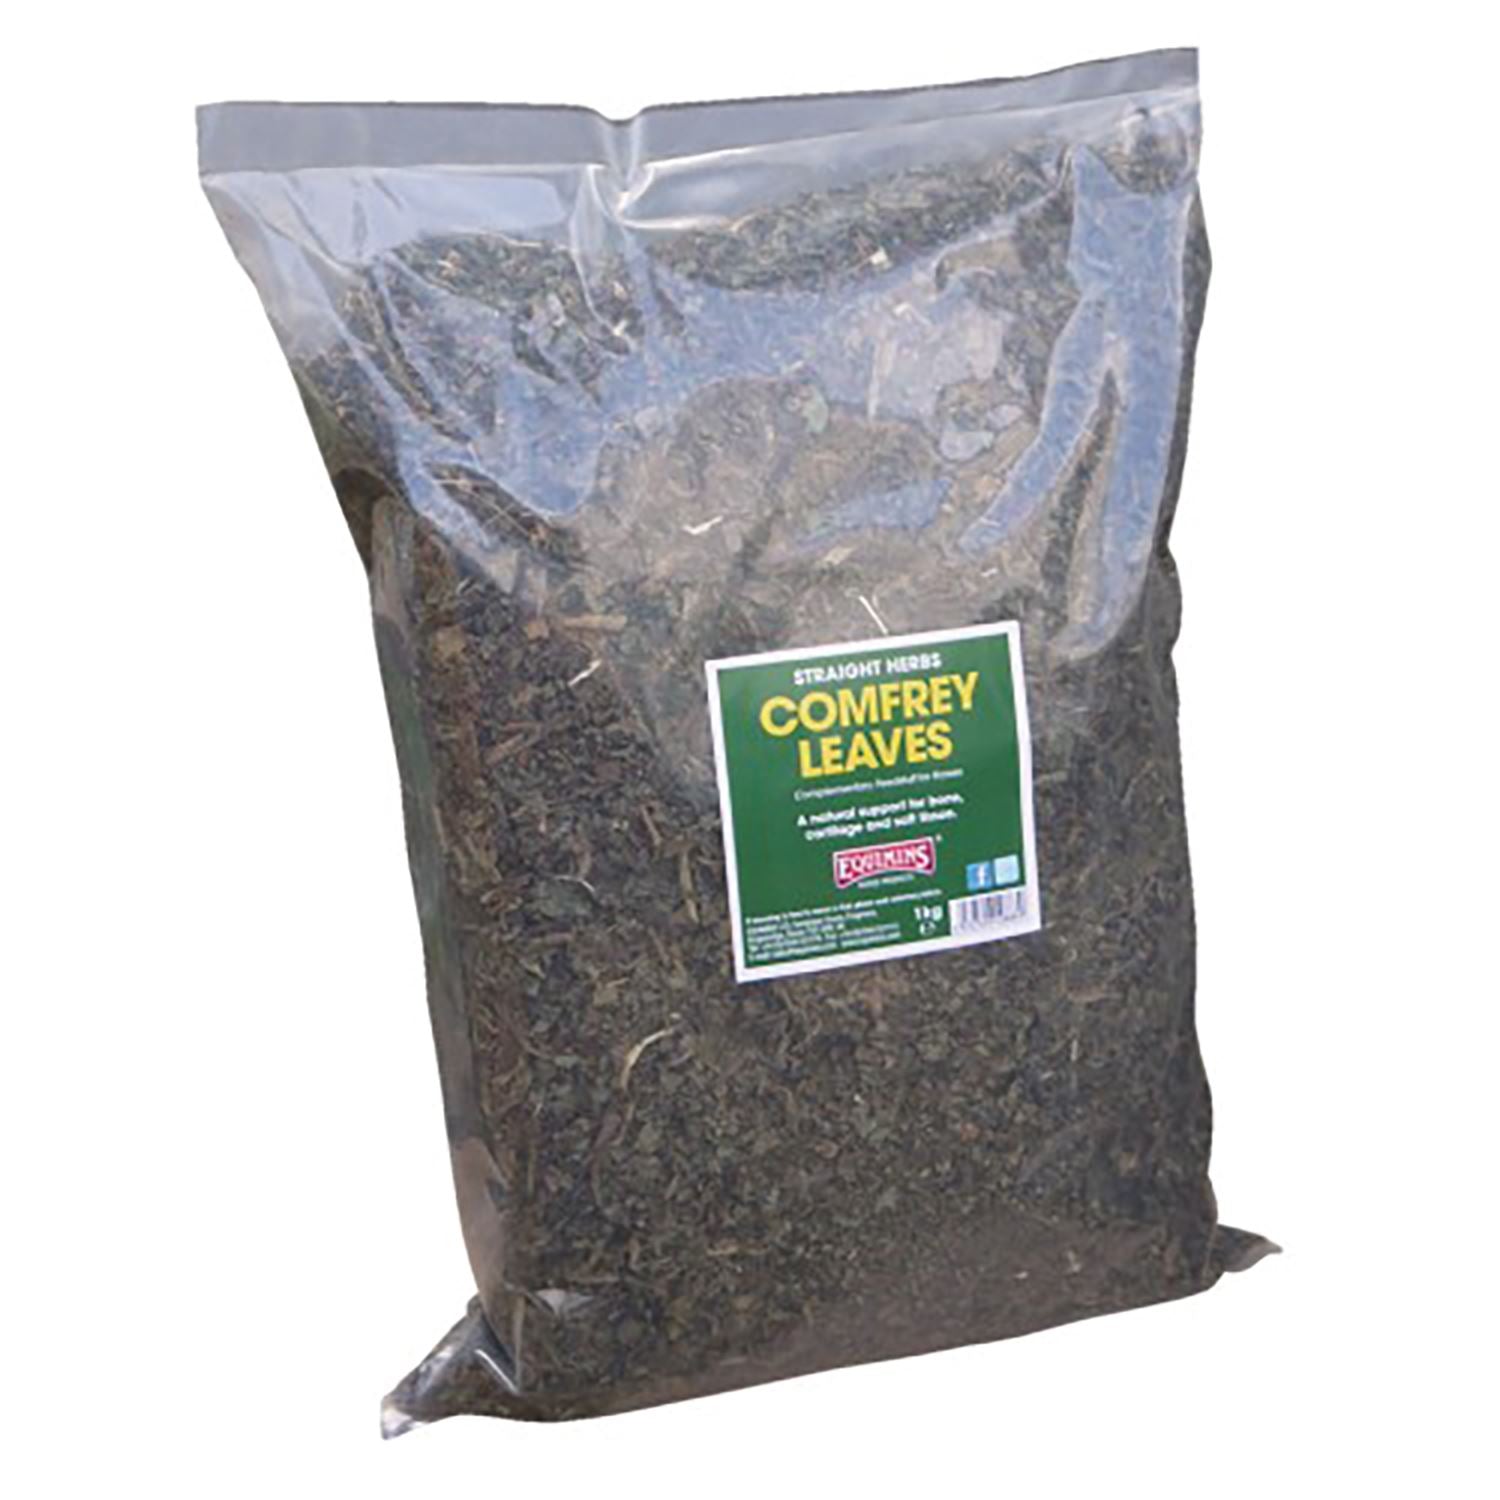 Equimins Straight Herbs Comfrey Leaves - Just Horse Riders